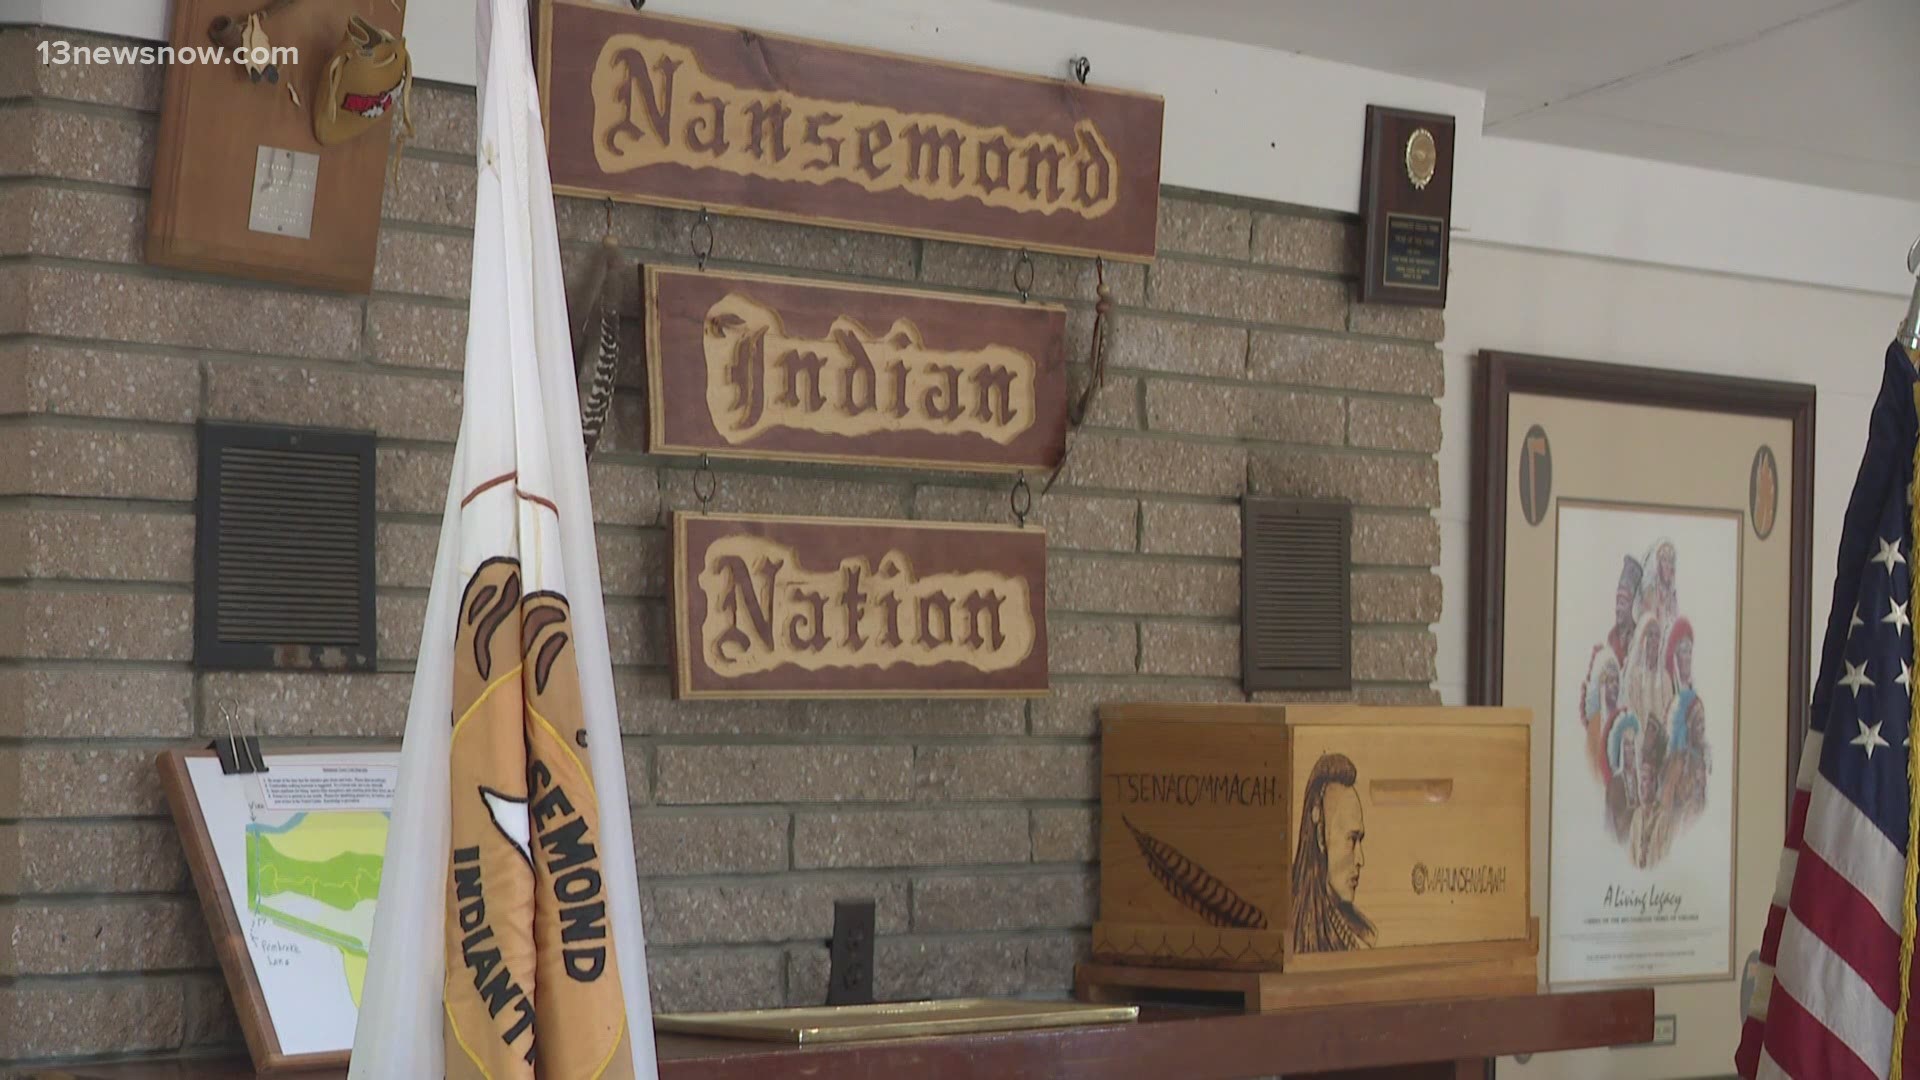 Nansemond Indian Nation Chief Earl Bass said about 25 percent of his 407-member tribe contracted COVID-19, and Bass said a few members and spouses have died.